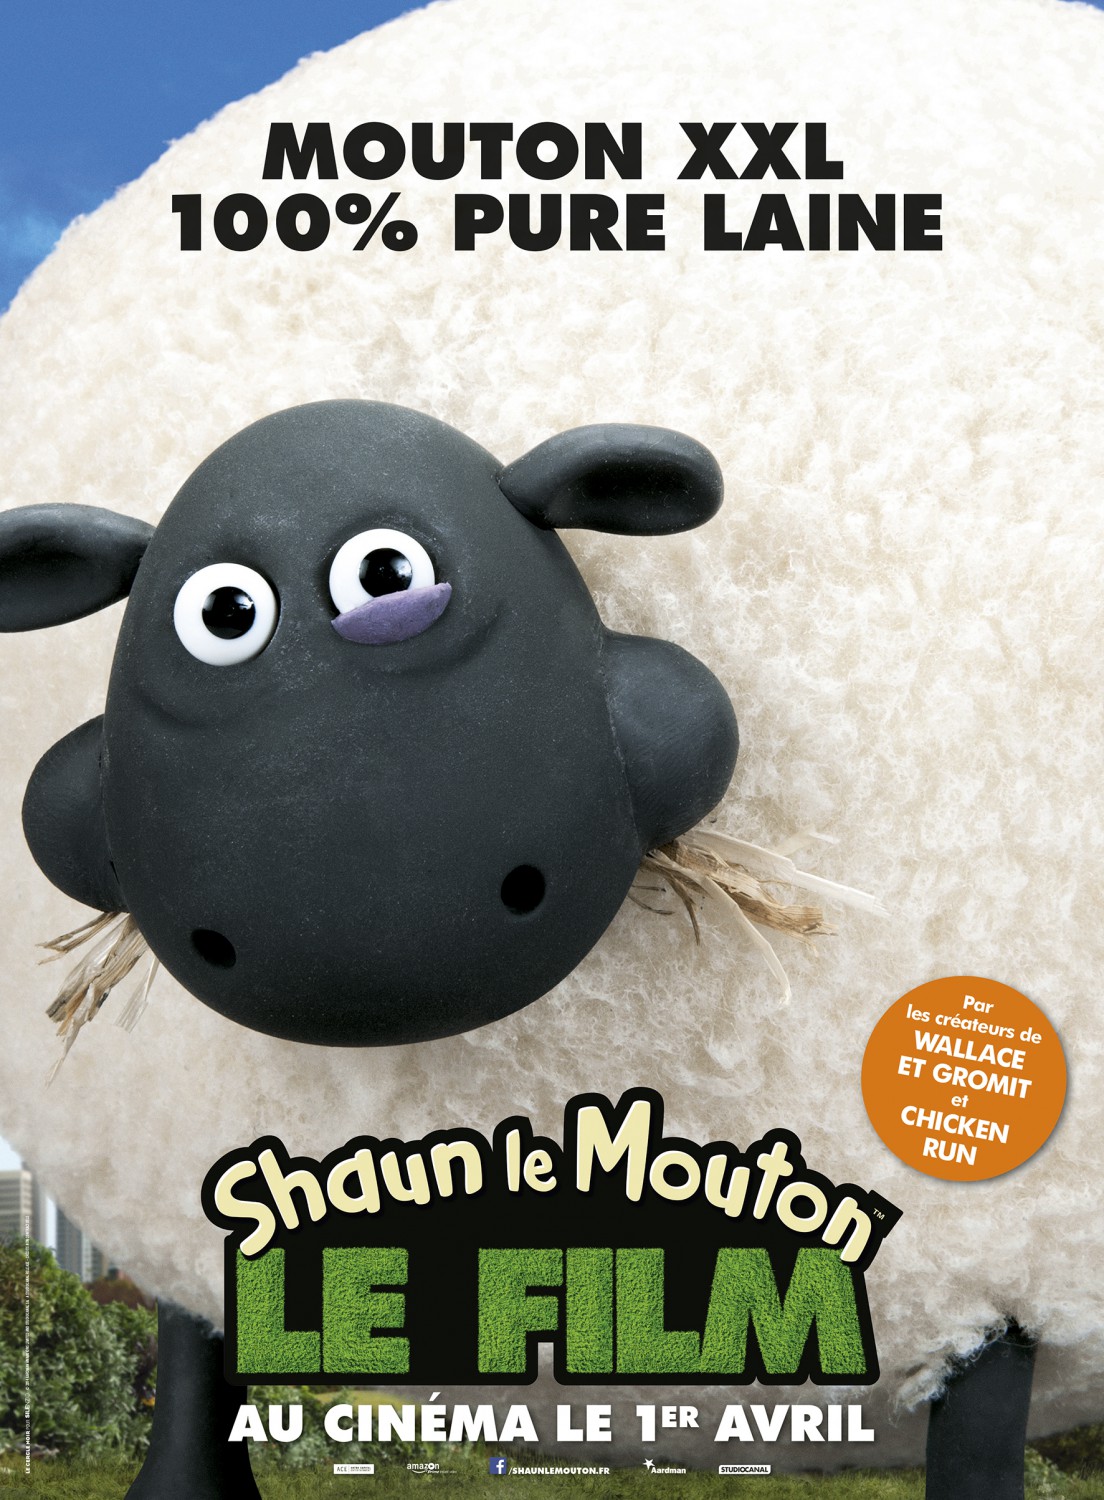 Extra Large Movie Poster Image for Shaun the Sheep (#20 of 23)